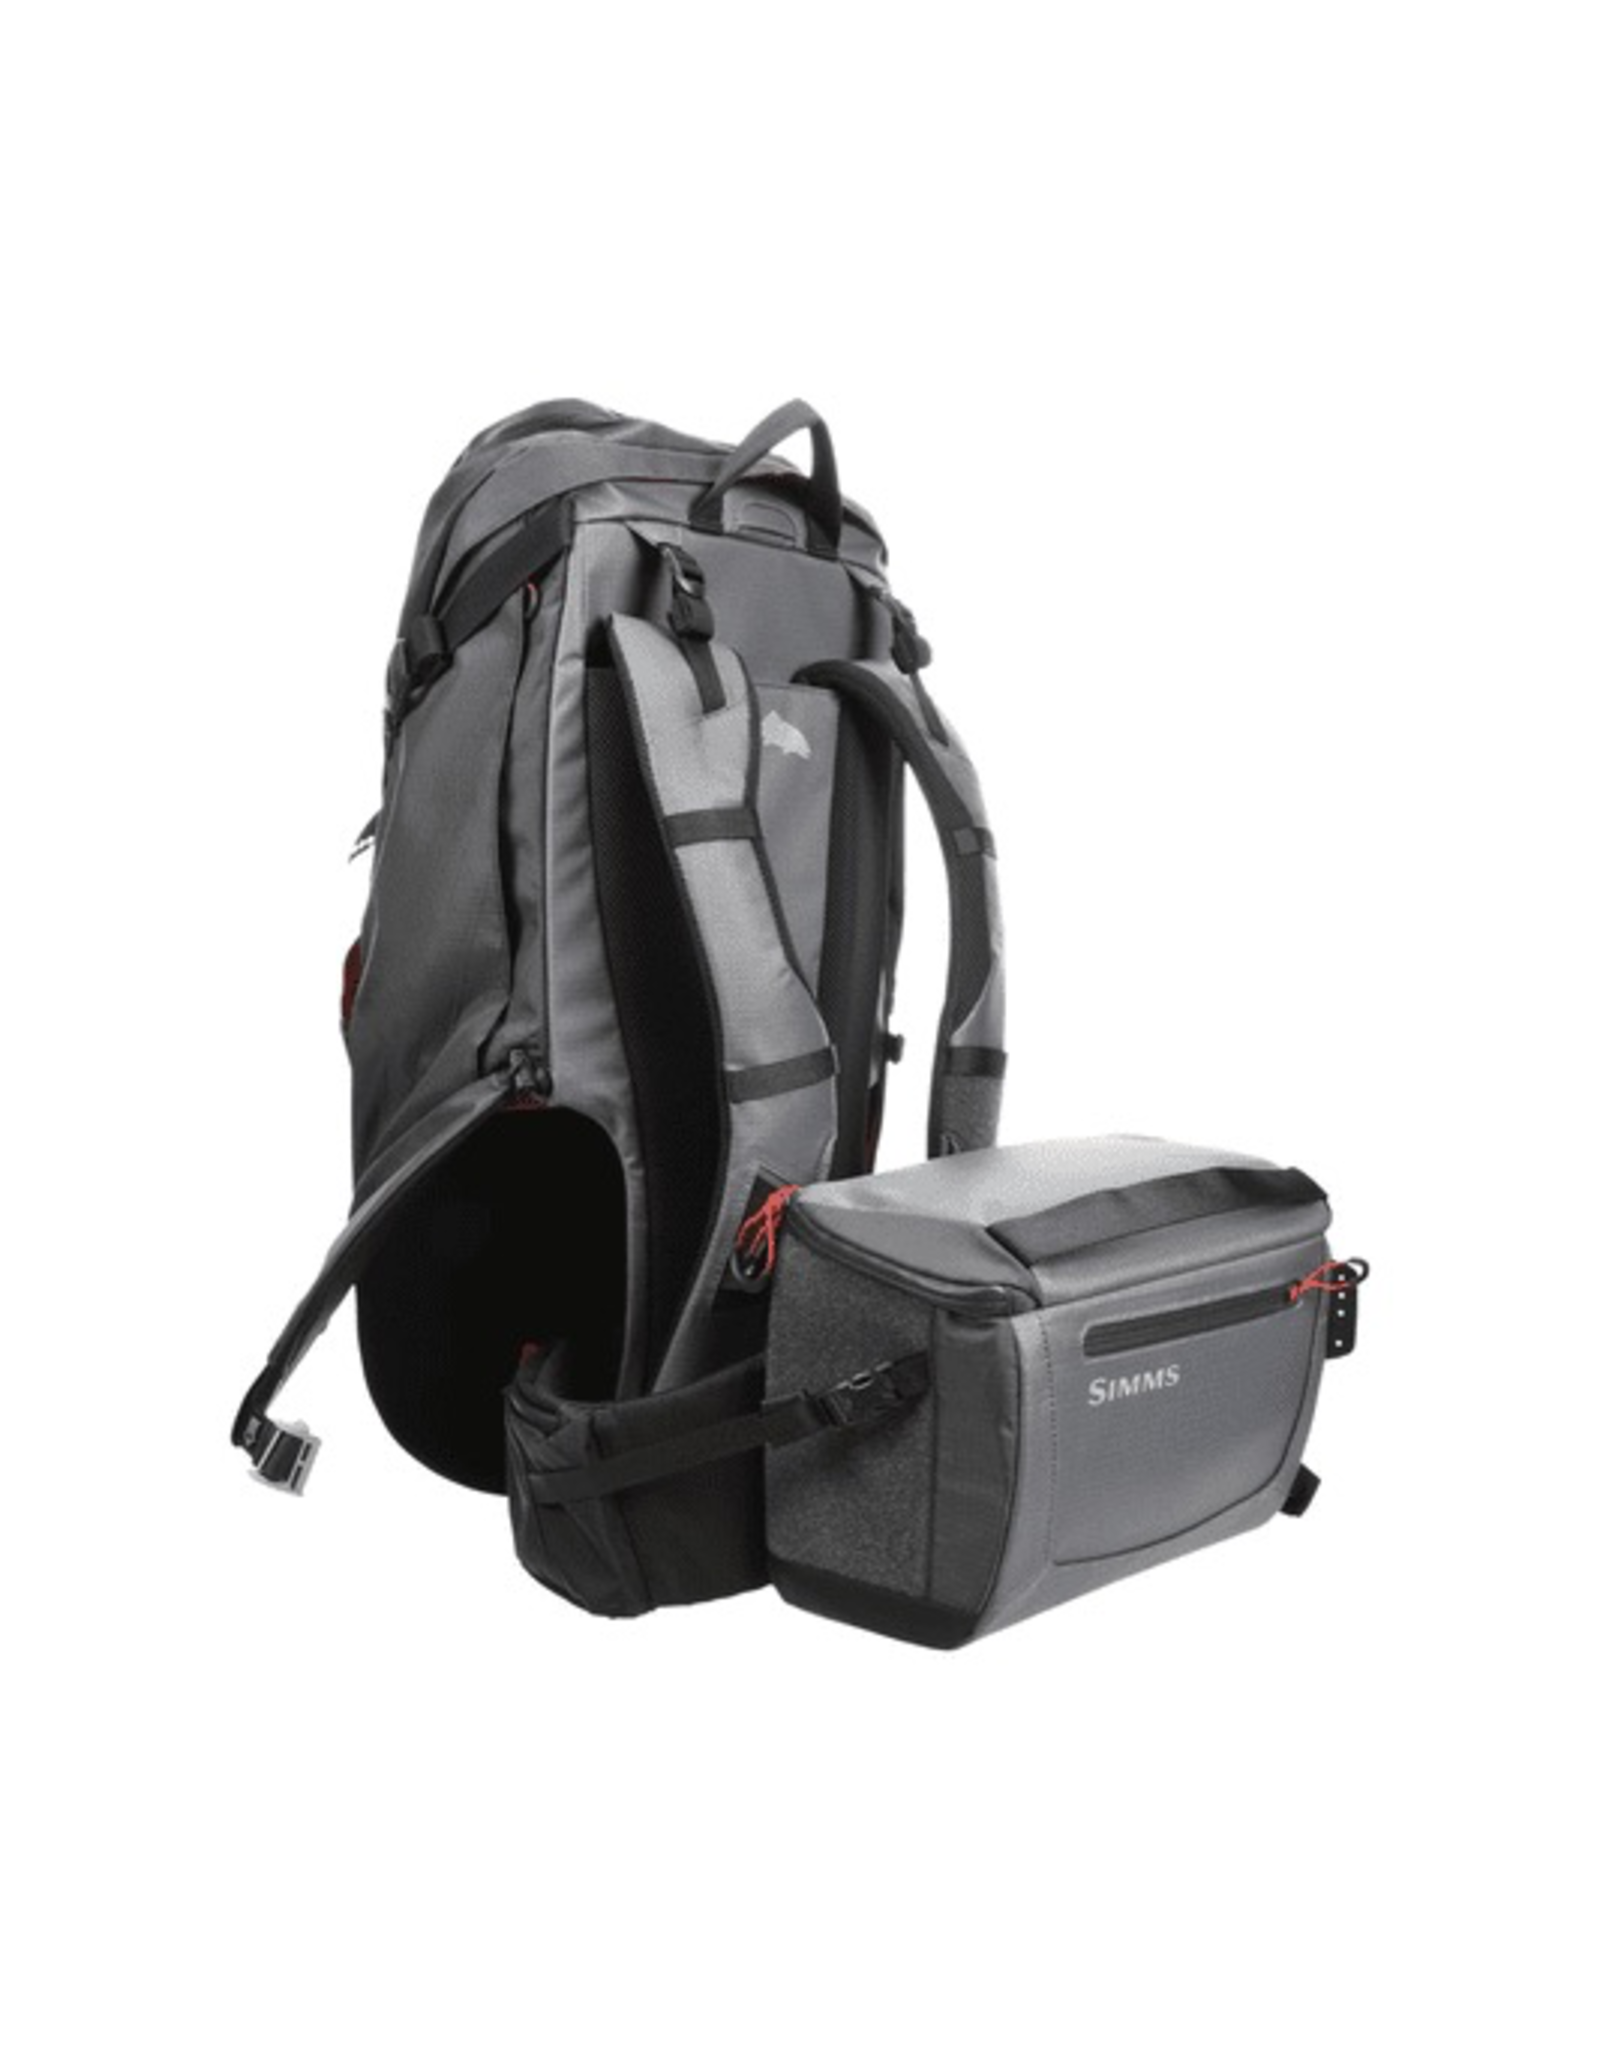 Simms Simms G4 Pro Shift Backpack